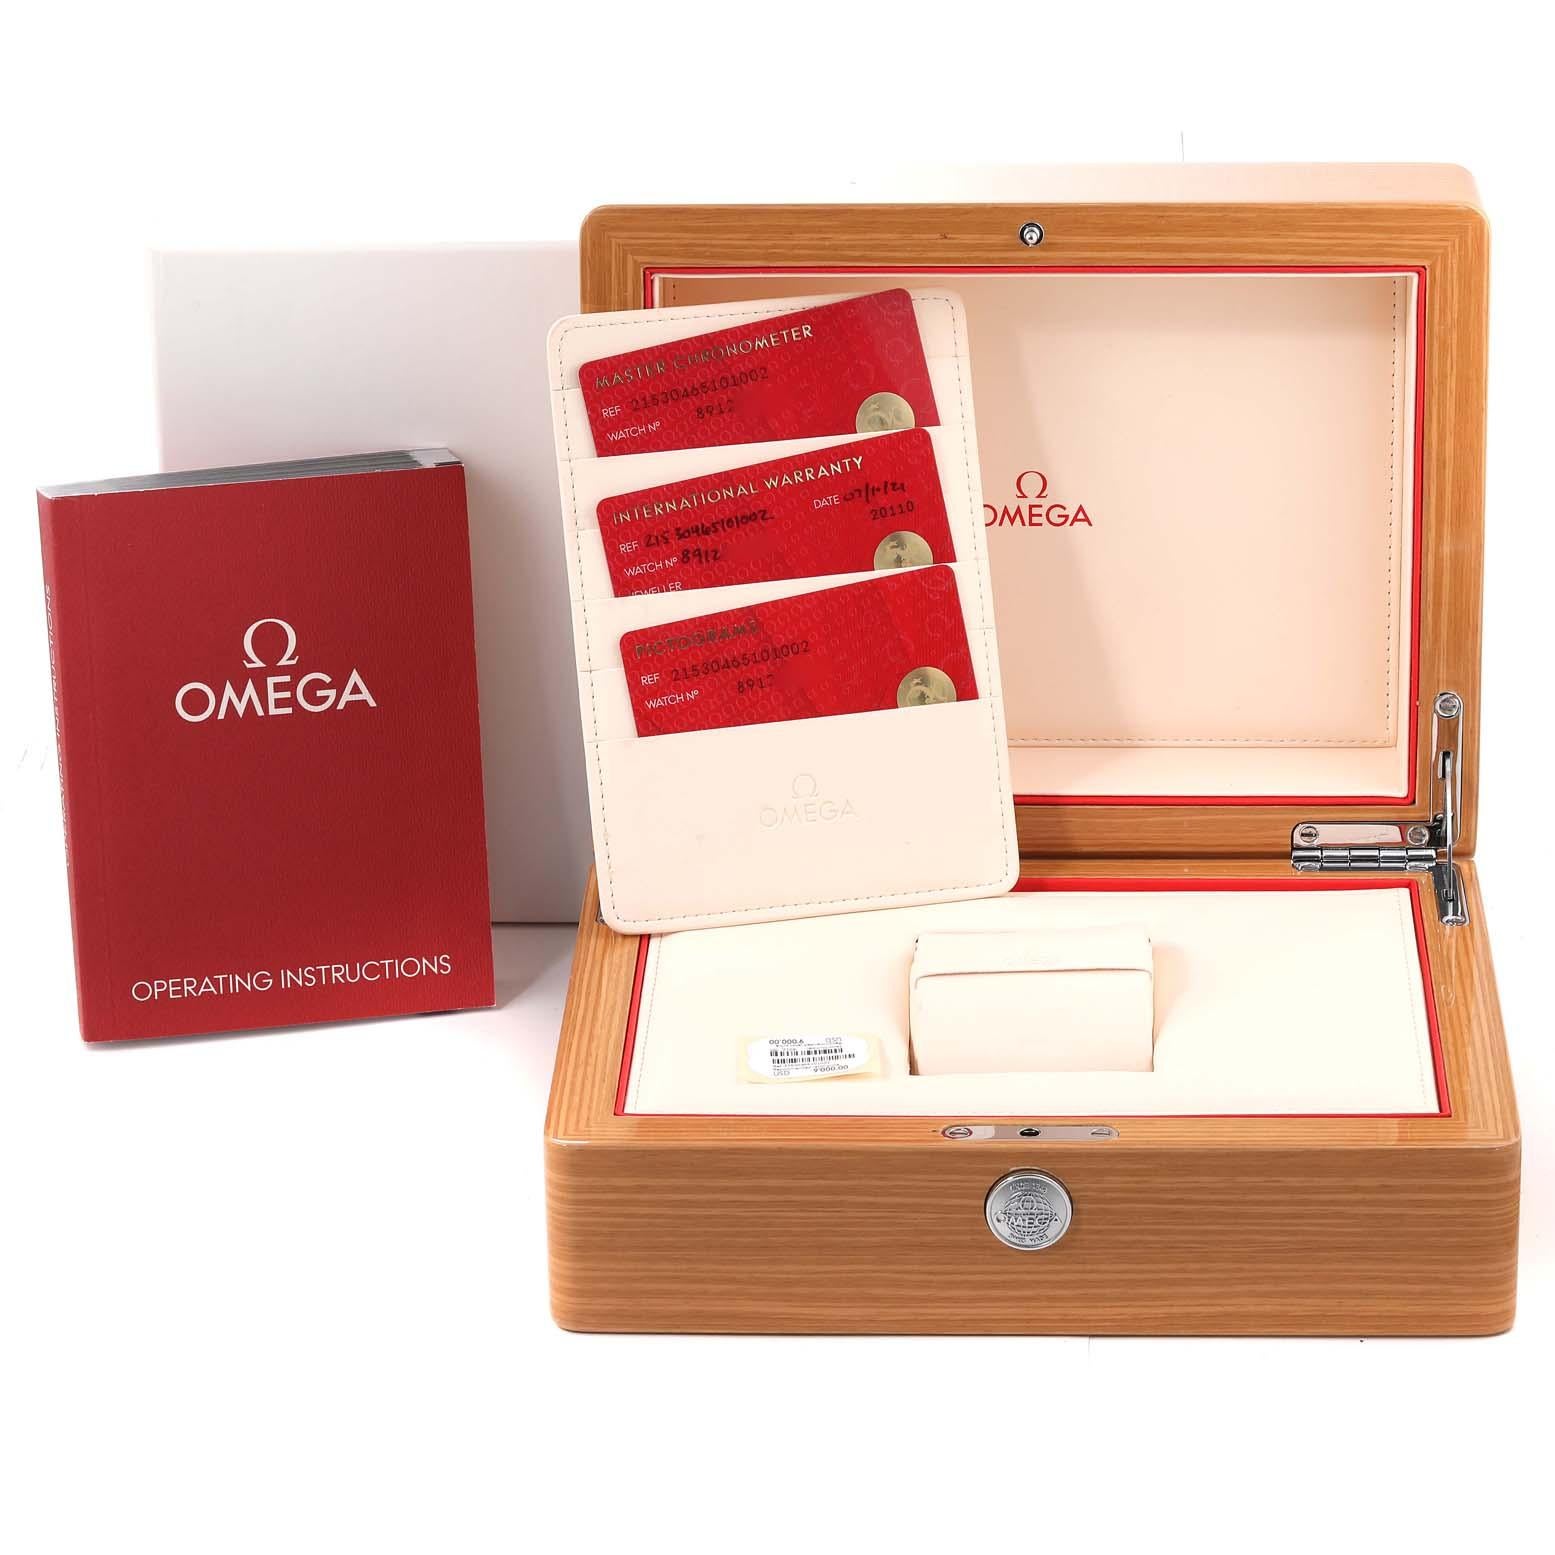 Omega Seamaster Chronograph Steel Mens Watch 215.30.46.51.01.002 Box Card For Sale 6